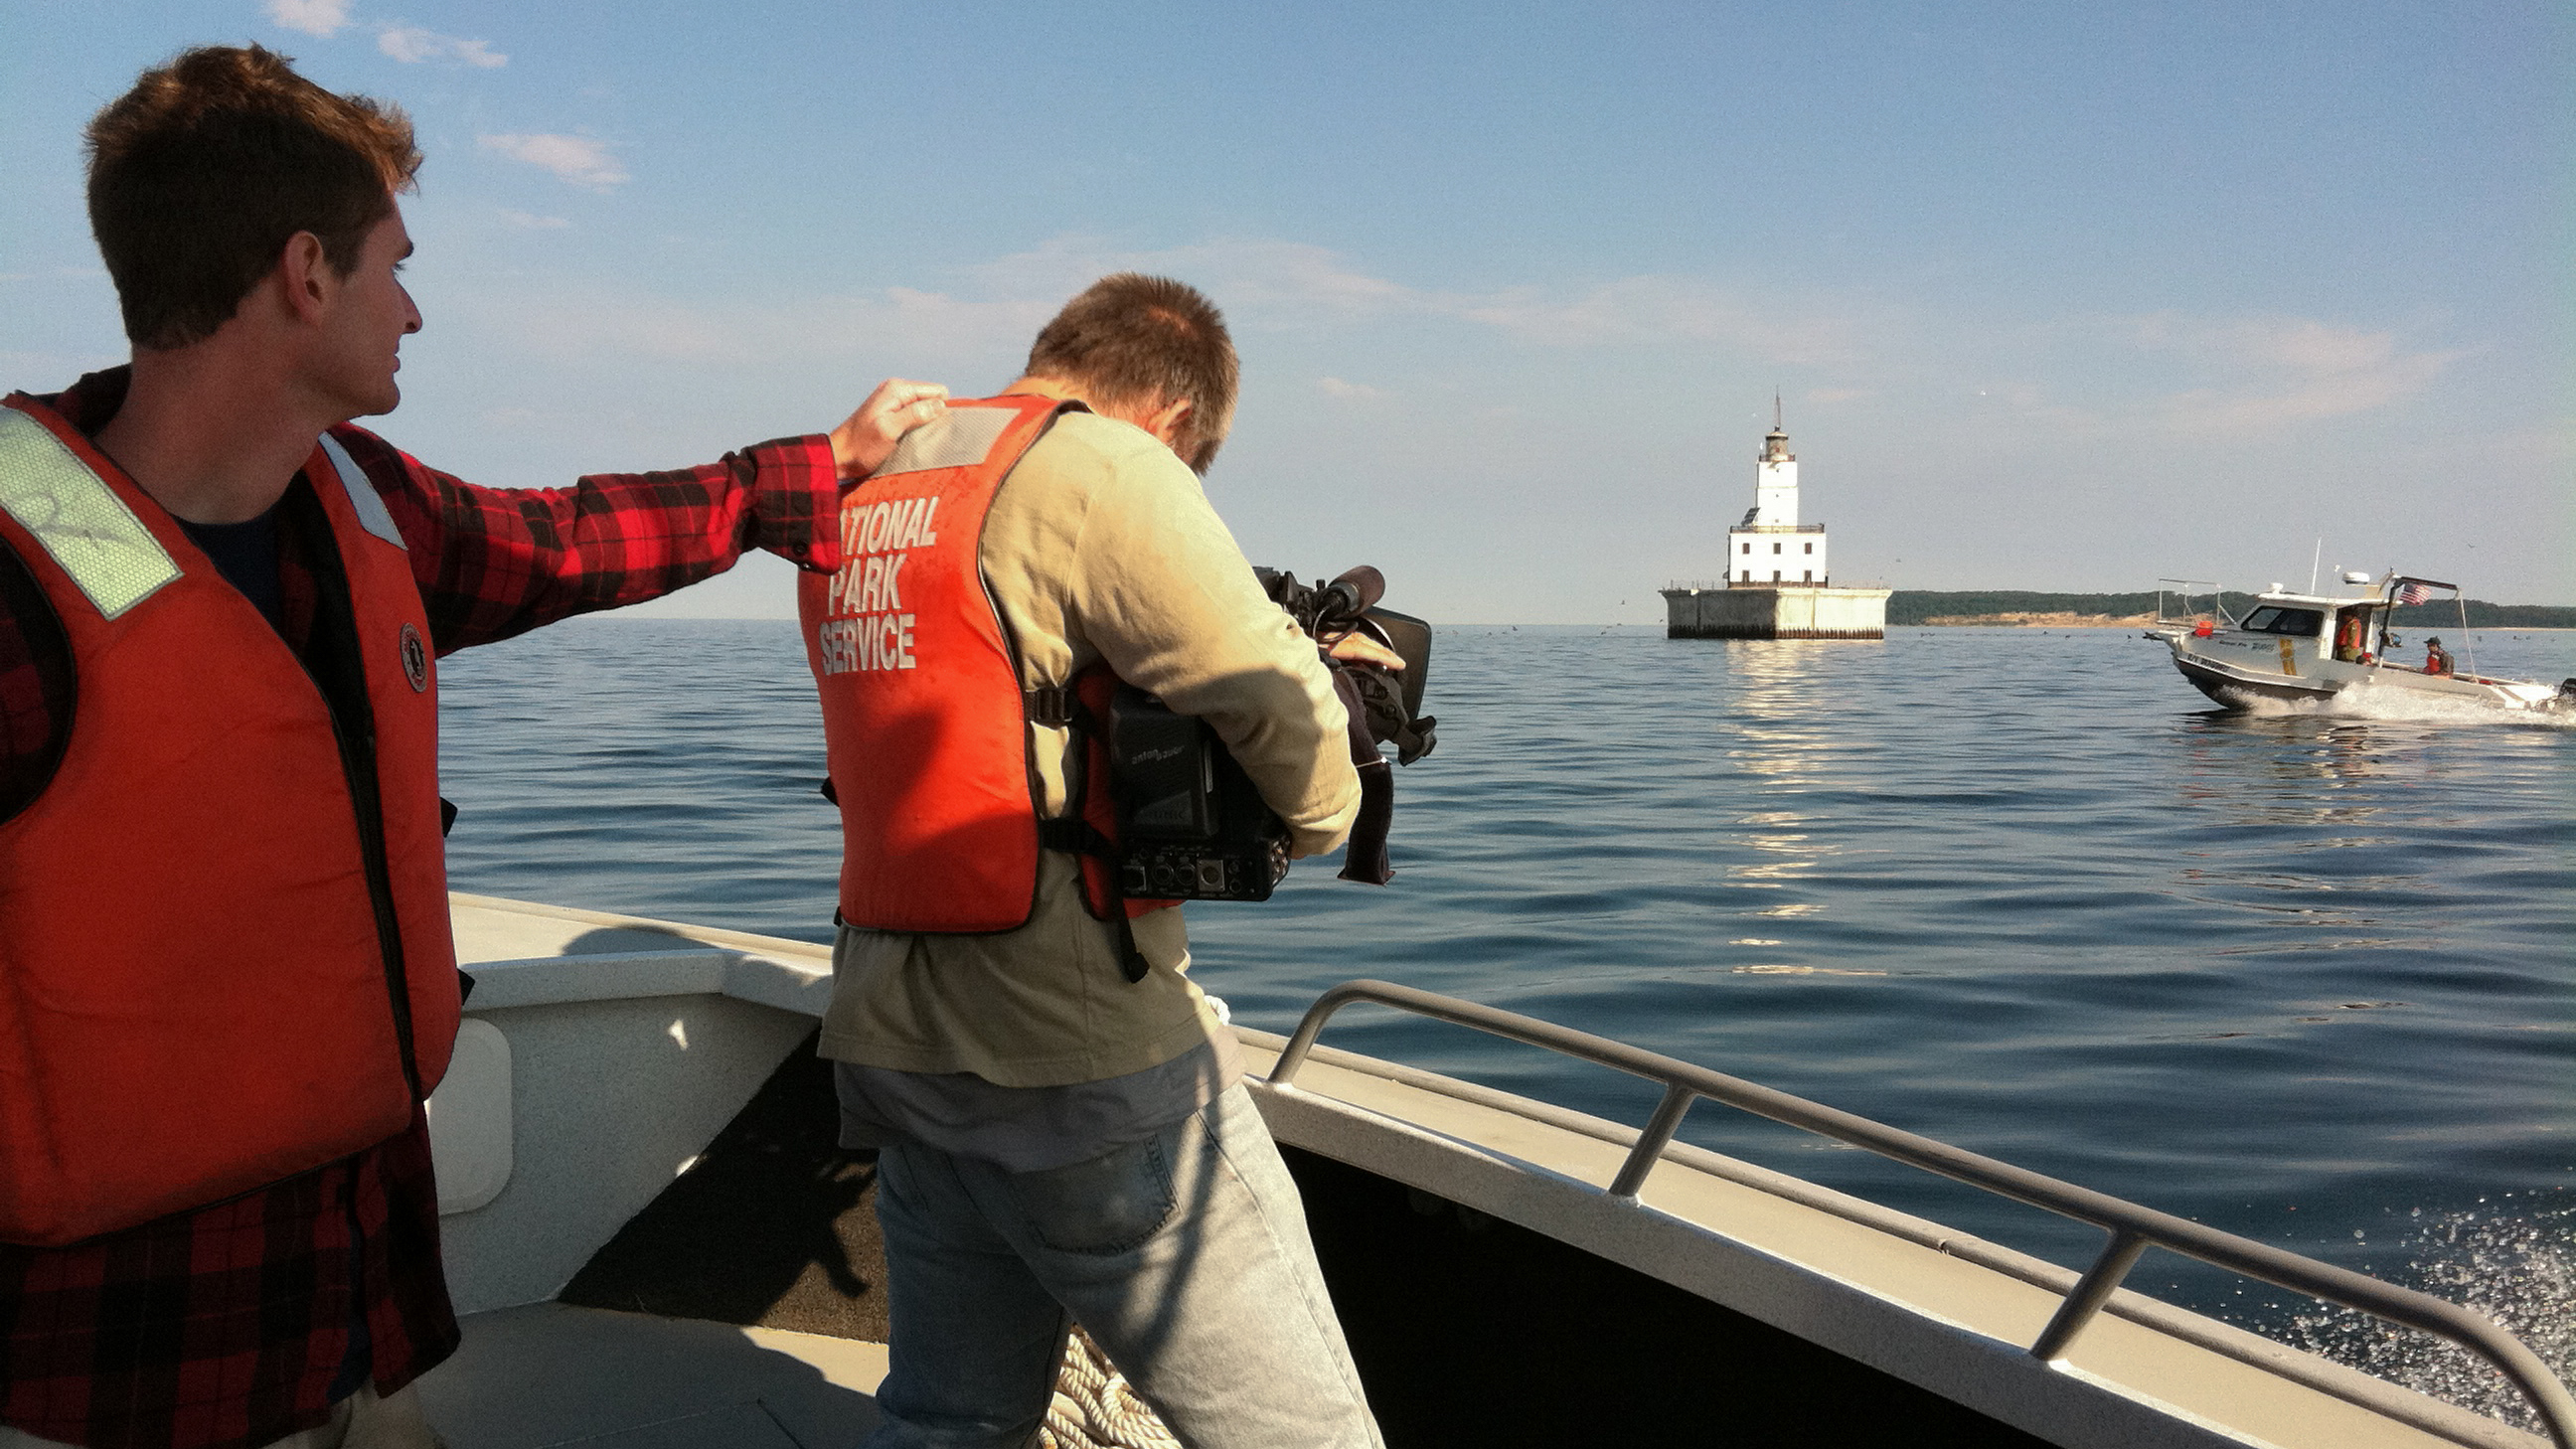 filming on a boat on the great lakes